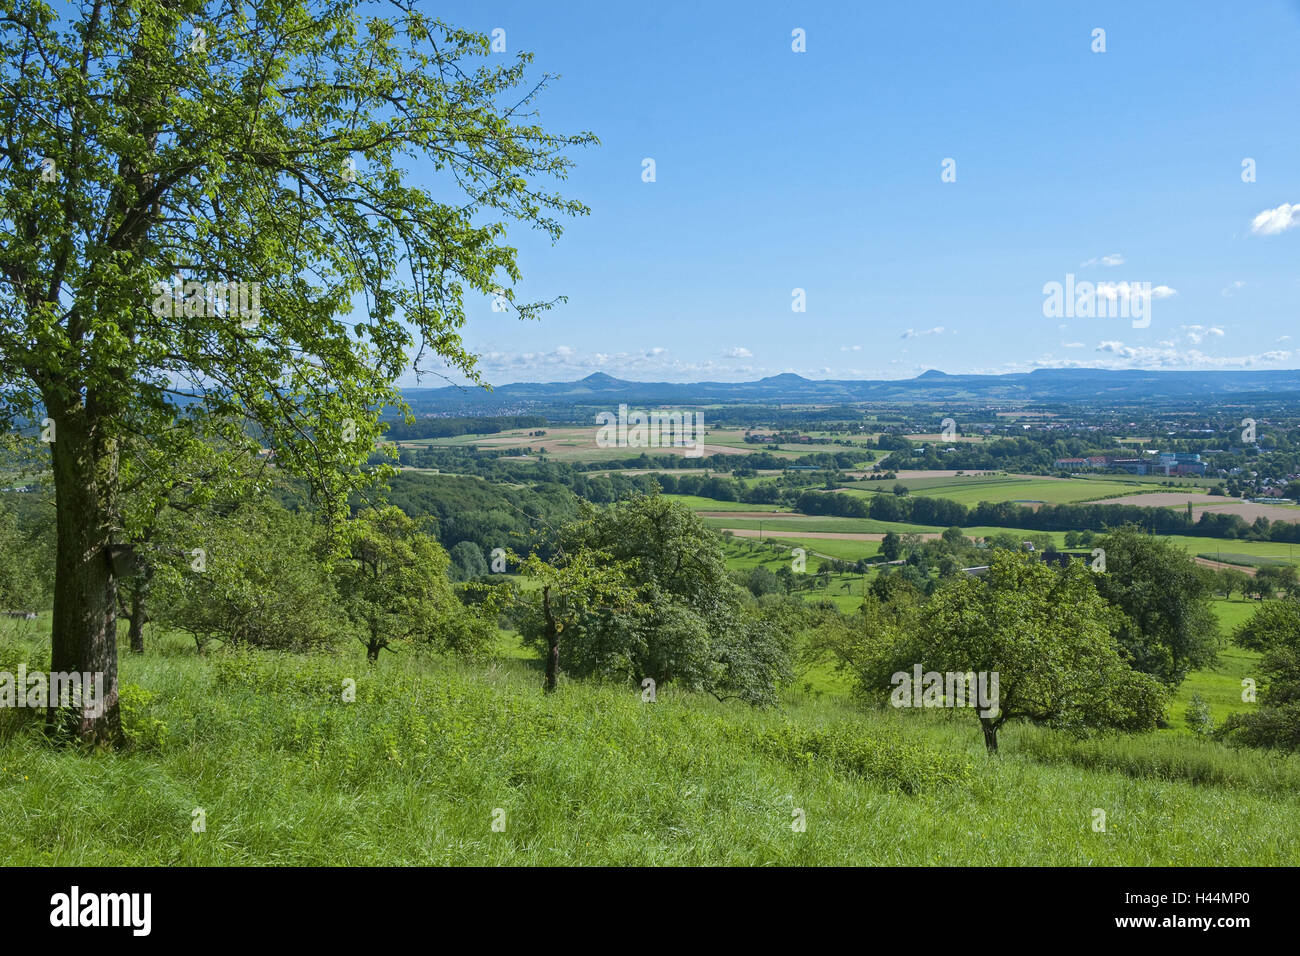 Germany, Baden-Wurttemberg, mountain Aichel, orchard meadows, scenery, nightmare foothills, view, tree, Staufen, Stauferland, orchard meadow, Stuifen, mountain Rech, Hohenstaufen, witness's mountains, meadow, heaven, blue, Stock Photo